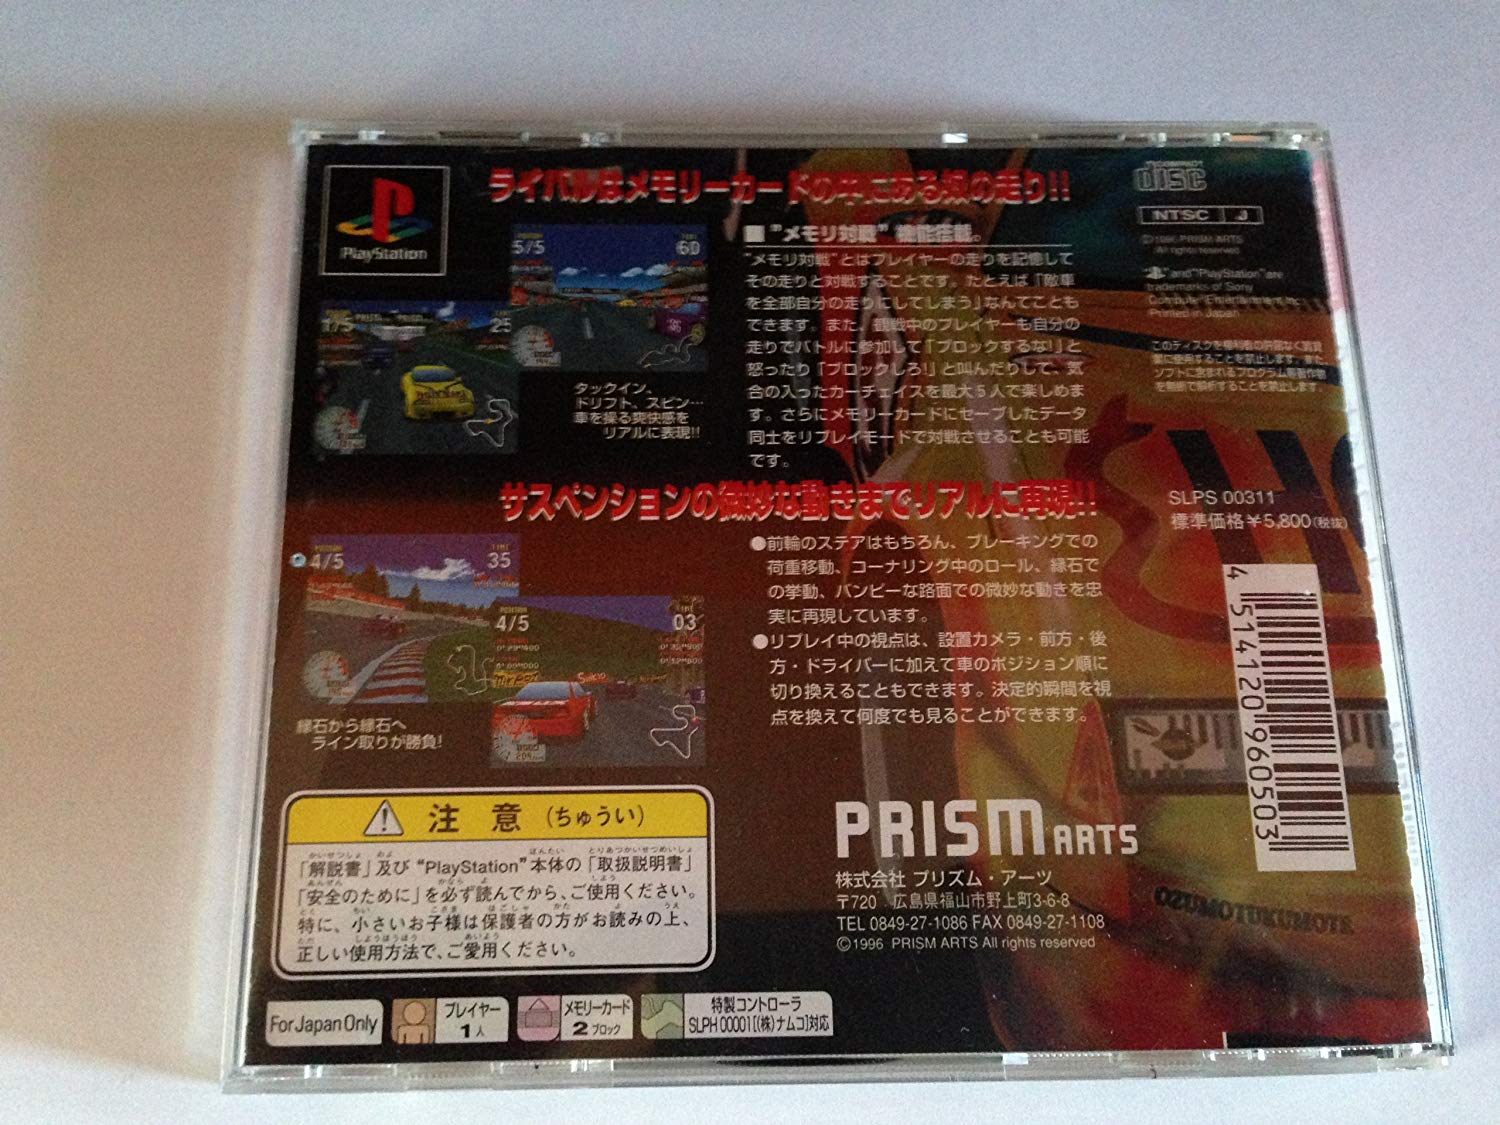 Circuit Beat Ps1 Prism Arts Sony Playstation 1 From Japan Ebay